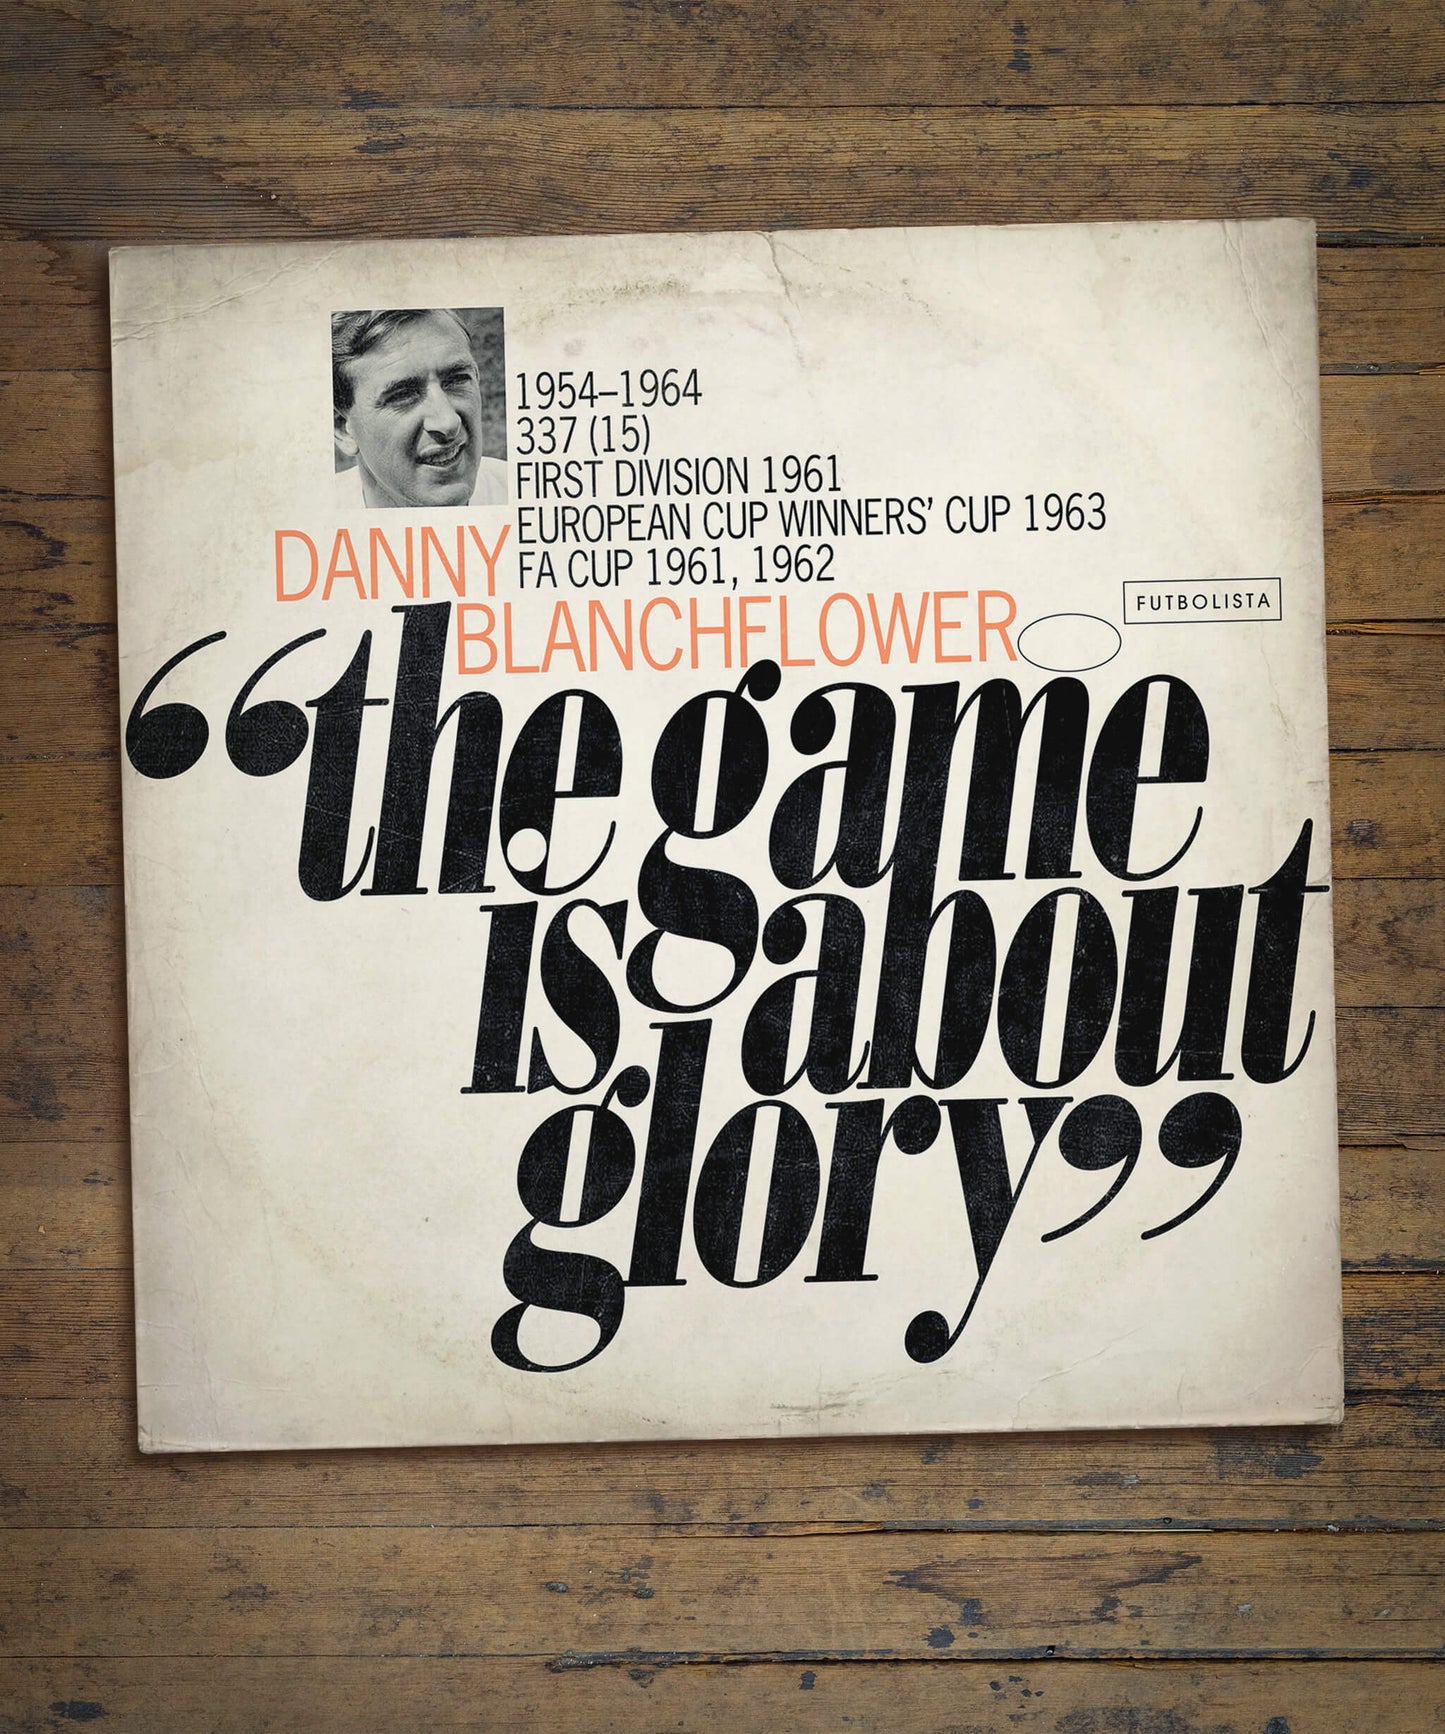 THE GAME IS ABOUT GLORY - LP Print